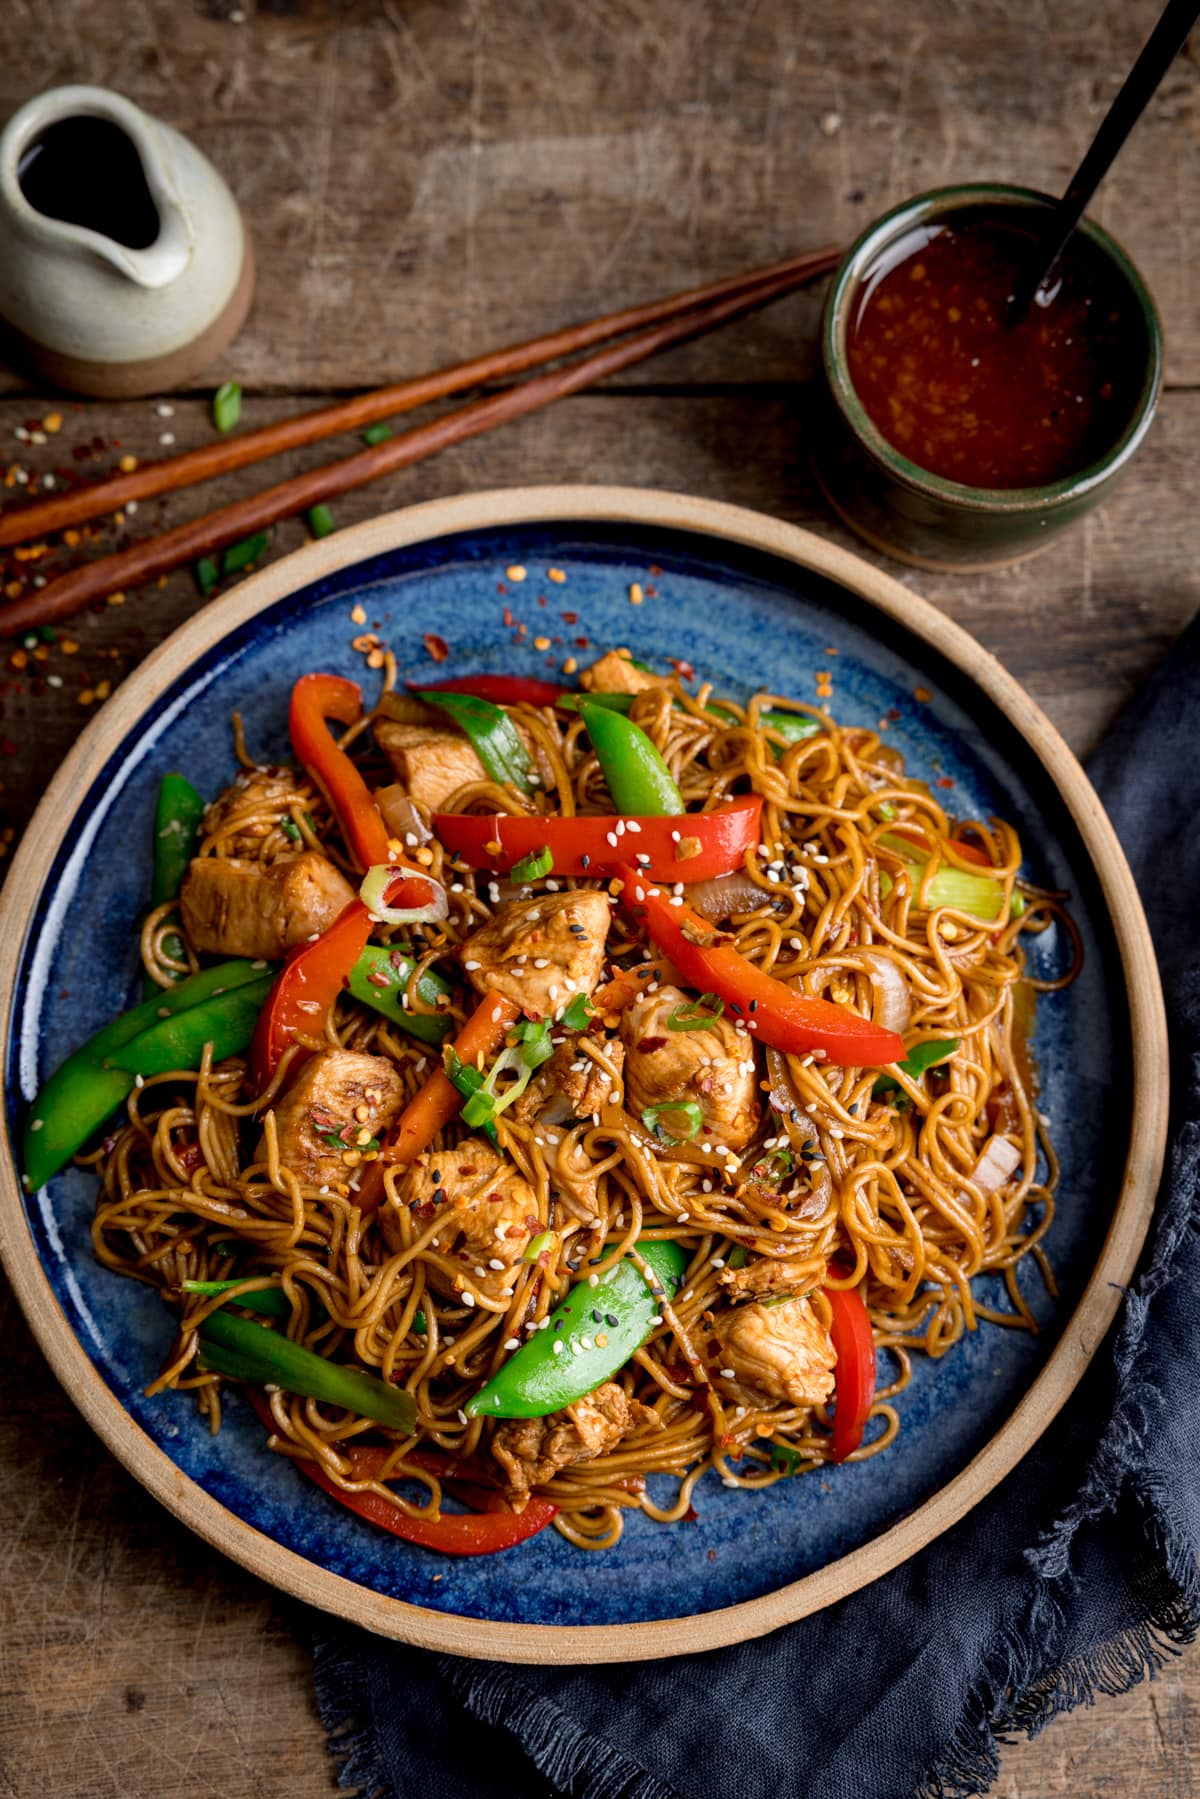 Overhead image of chicken lo mein on a blue plate on top of a wooden table. There is a pot of sweet chilli sauce, a little jug of soy sauce and some chopsticks at the top of the image.